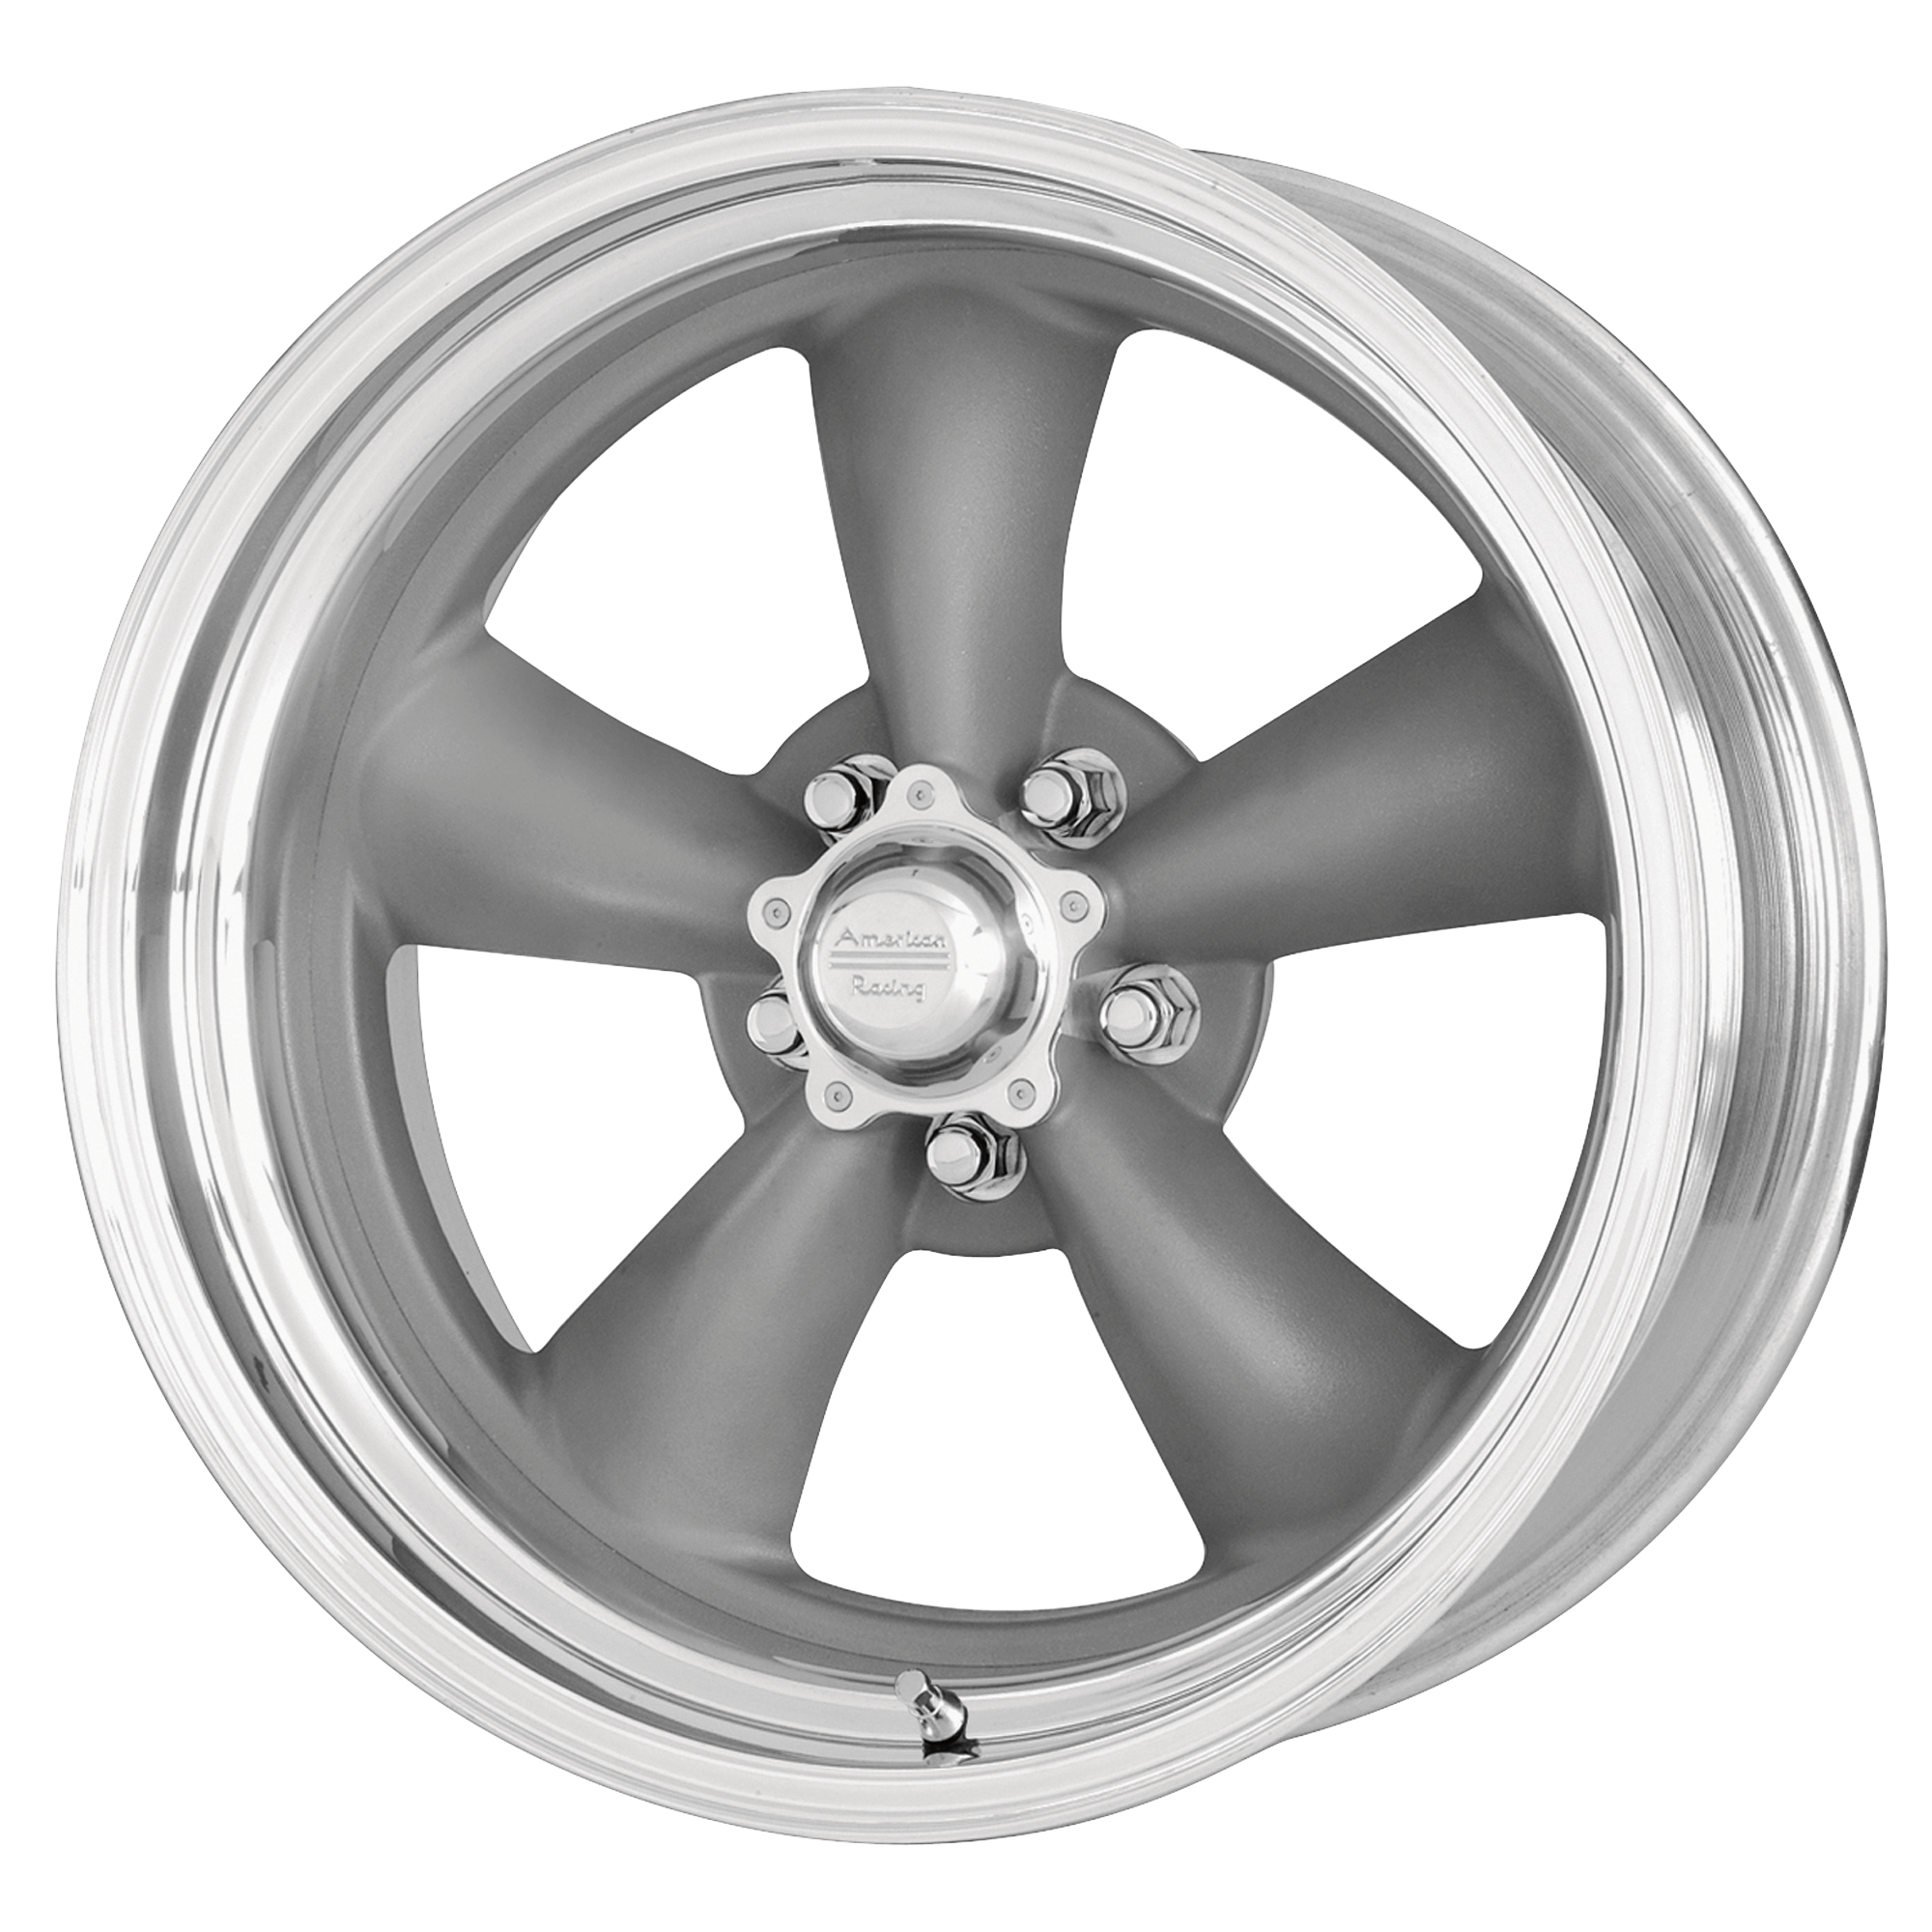 CLASSIC TORQ THRUST II ONE PIECE 18x10 Blank MAG GRAY W/ MACHINED LIP (6 mm) - Tires and Engine Performance